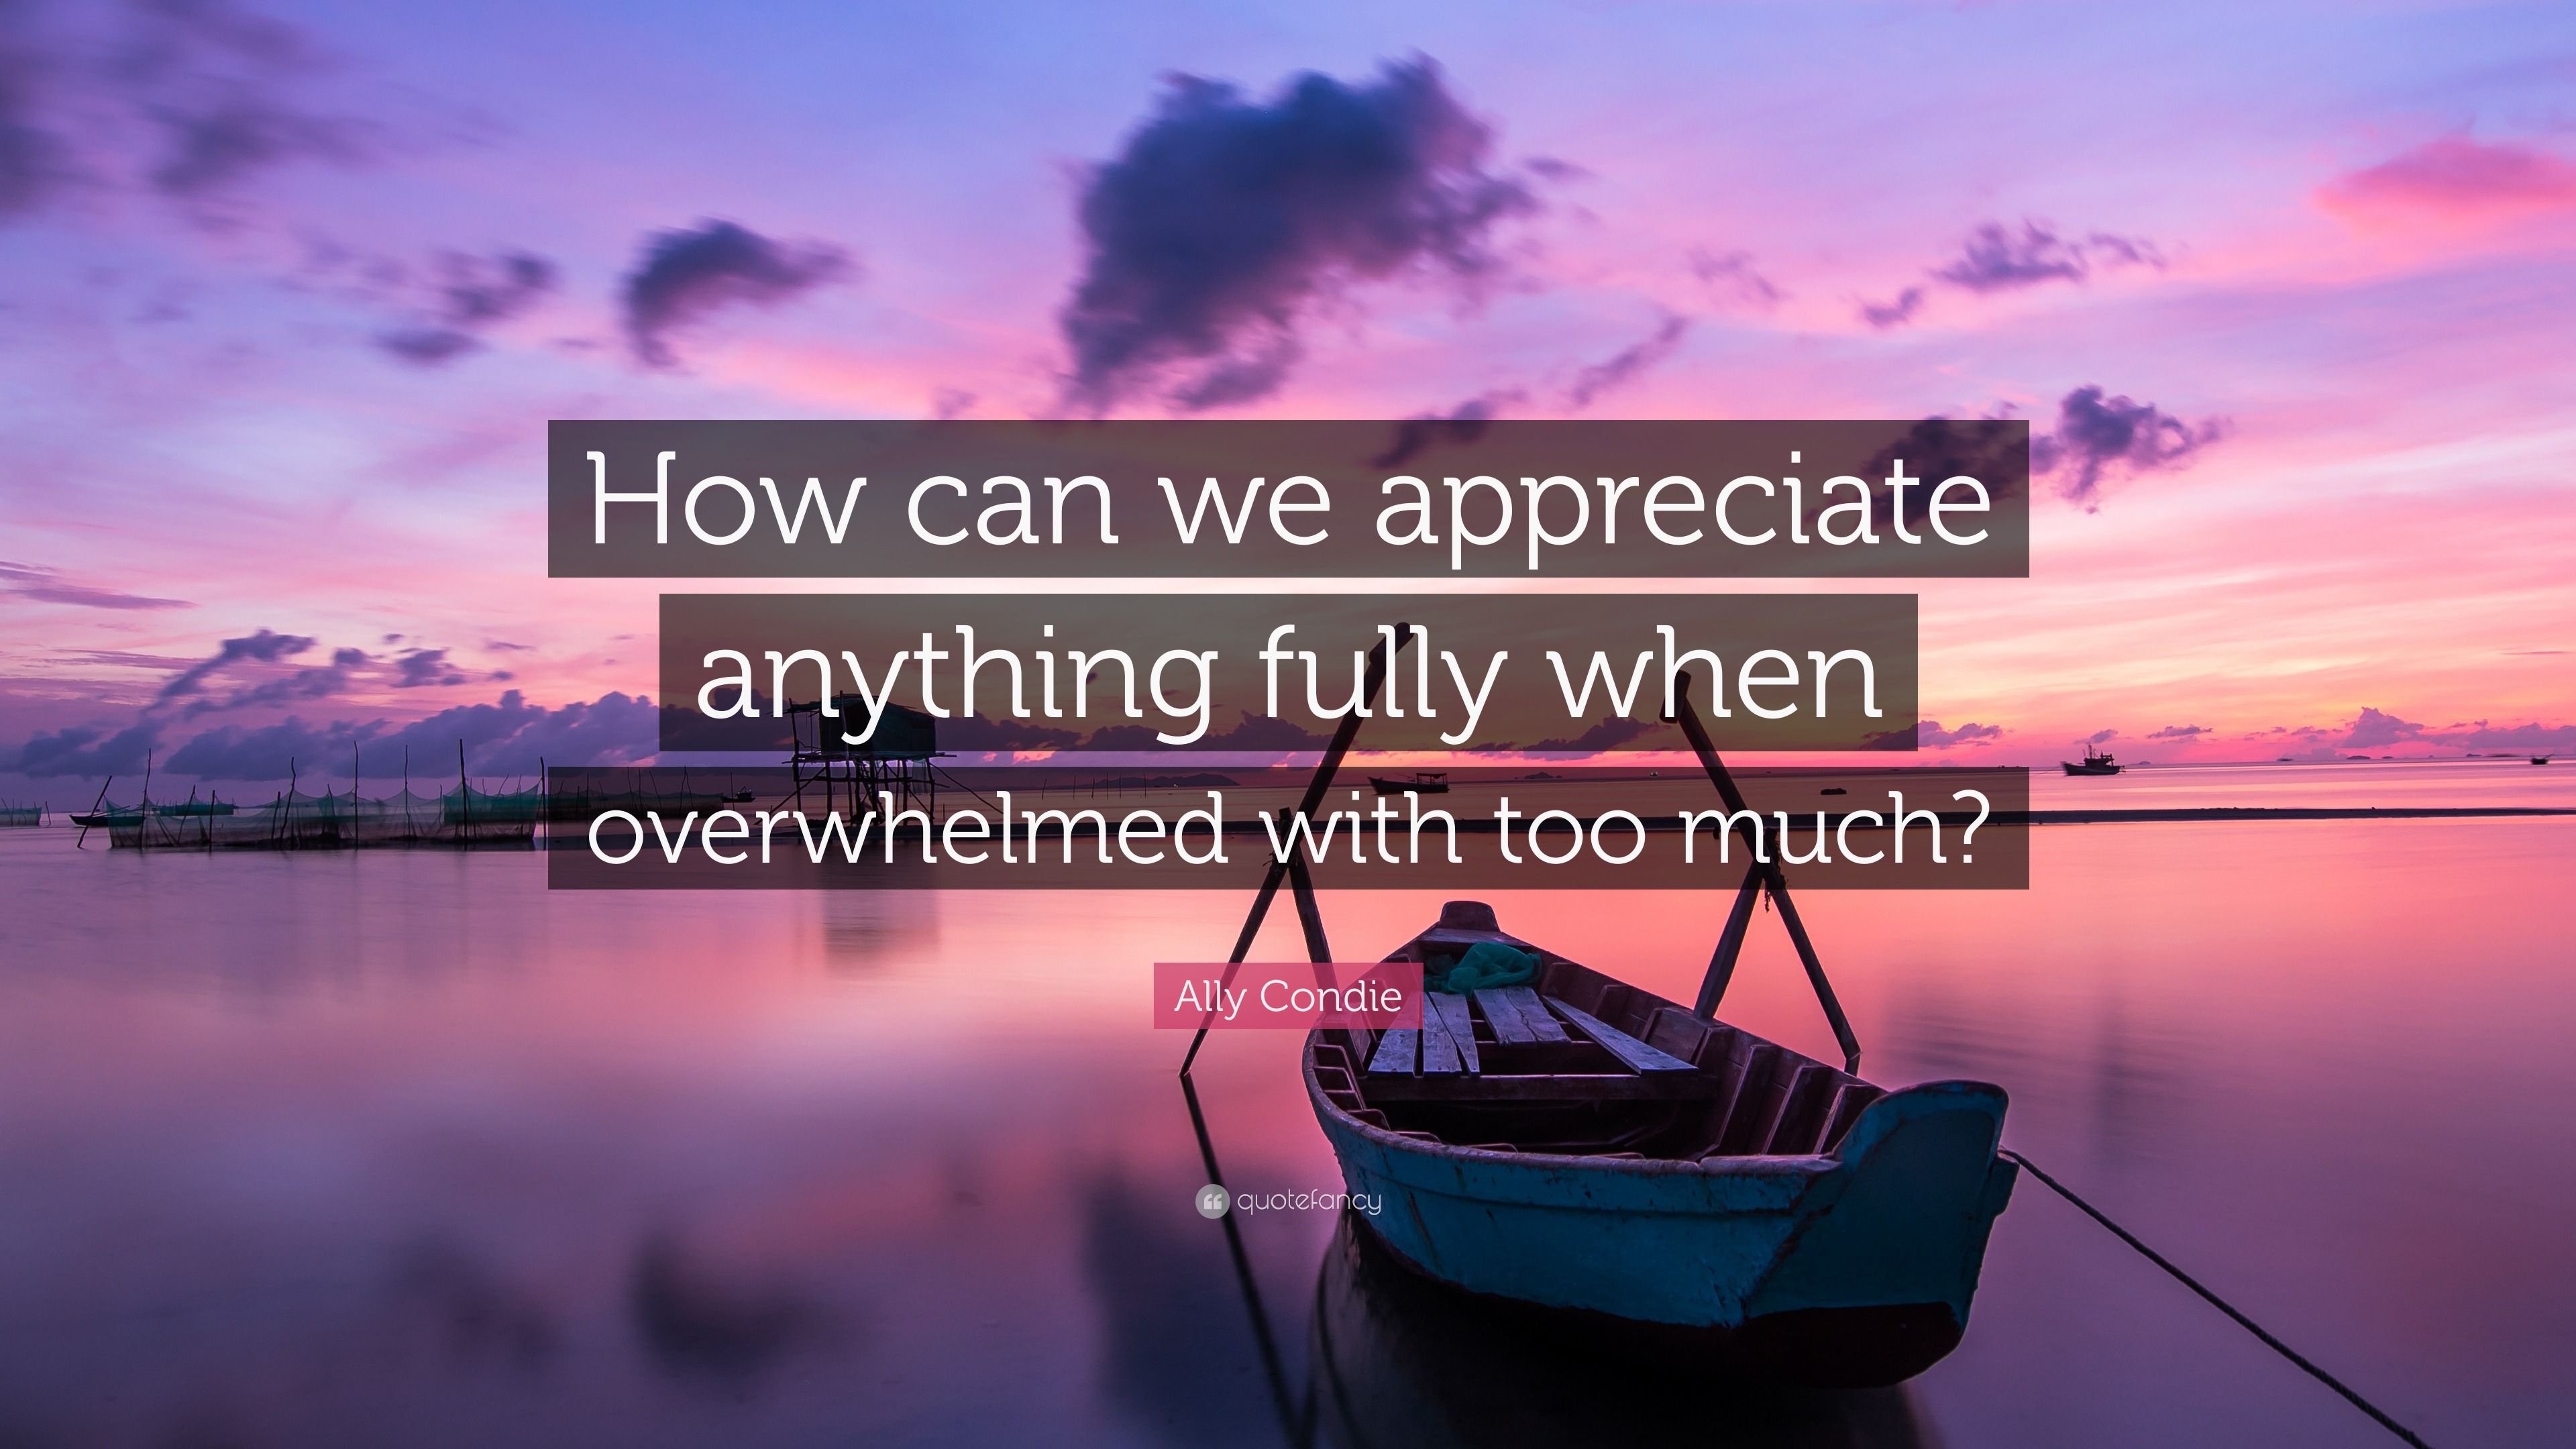 Ally Condie Quote: “How can we appreciate anything fully when ...